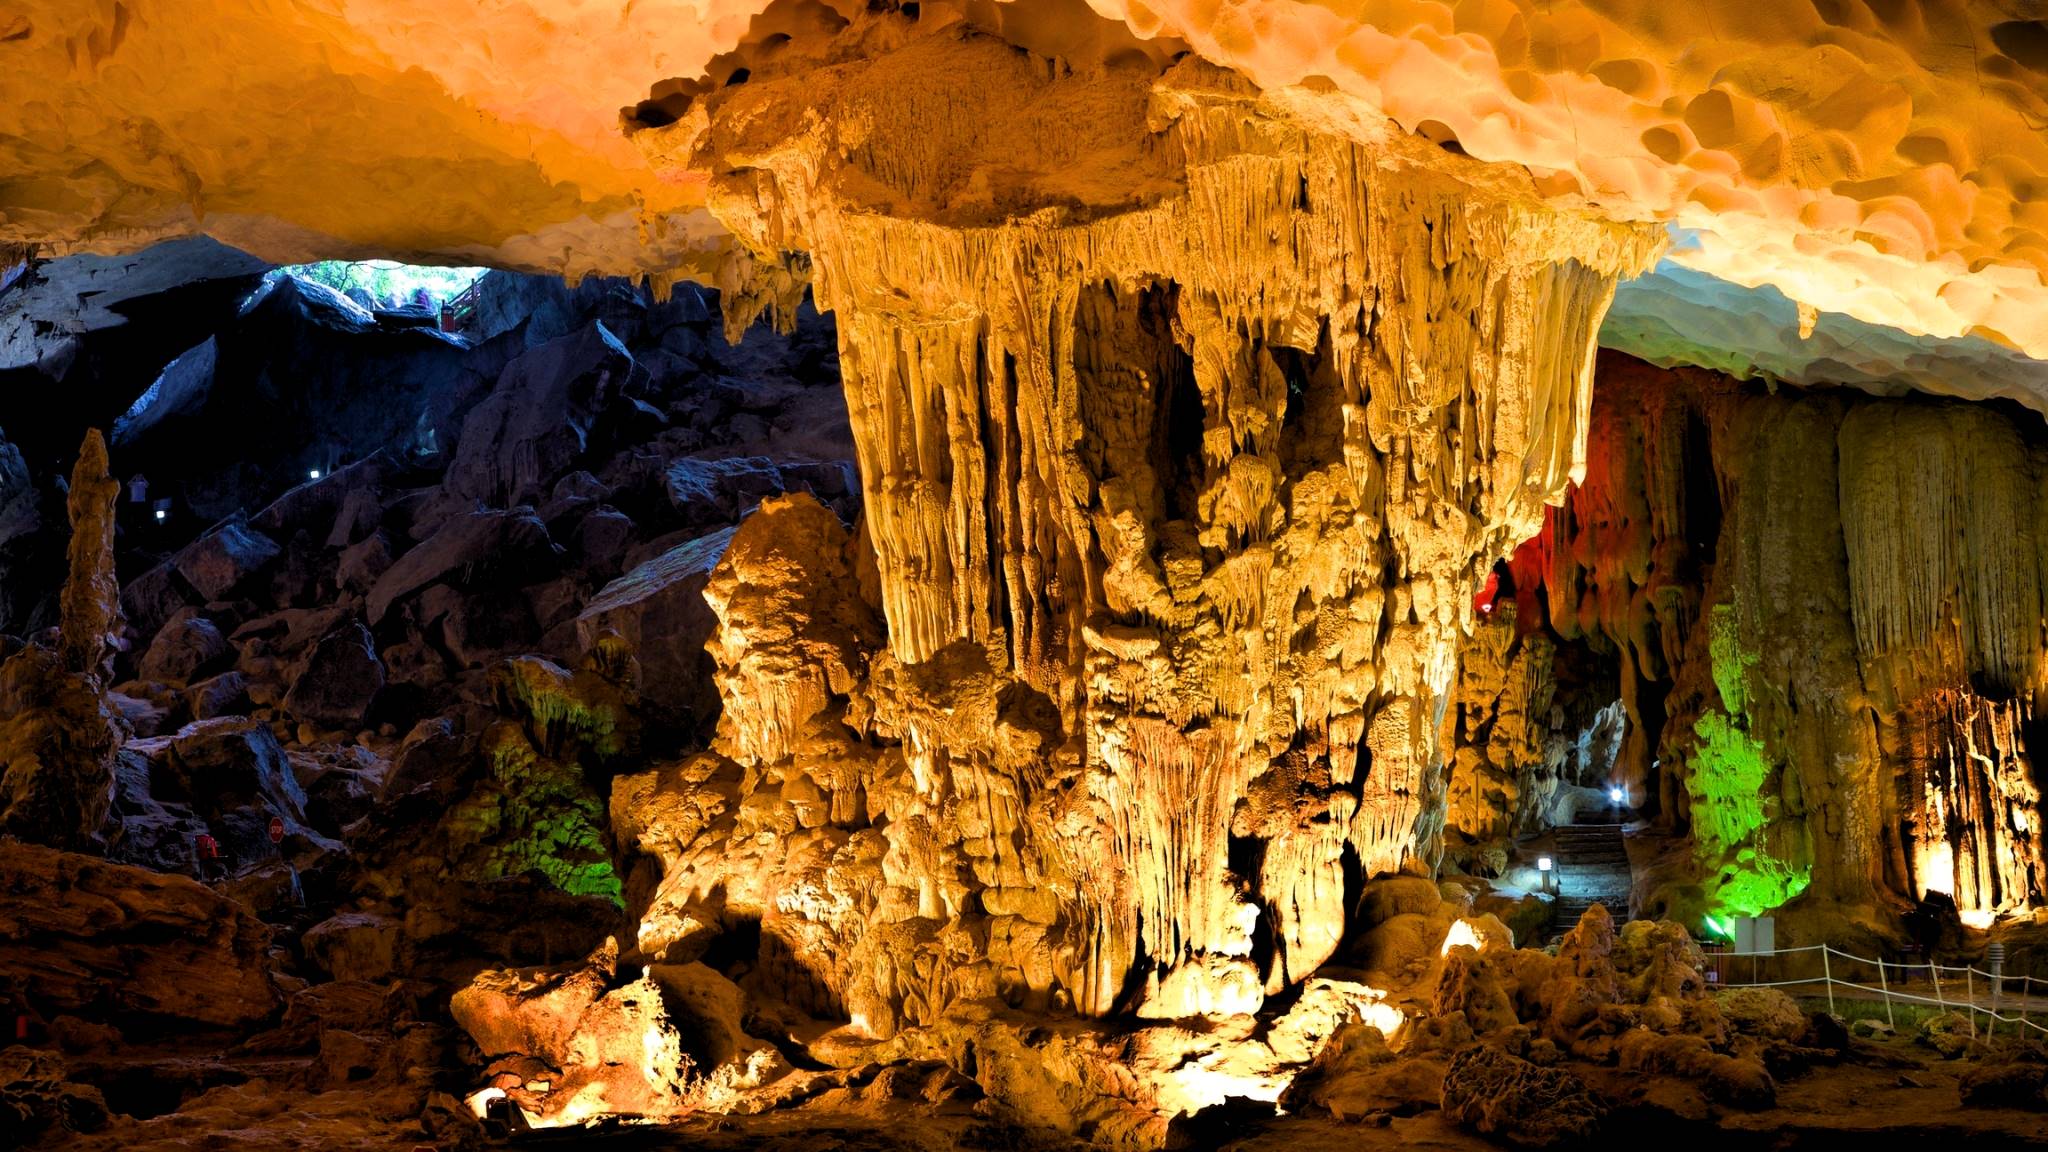 The giant Trung Trang Cave